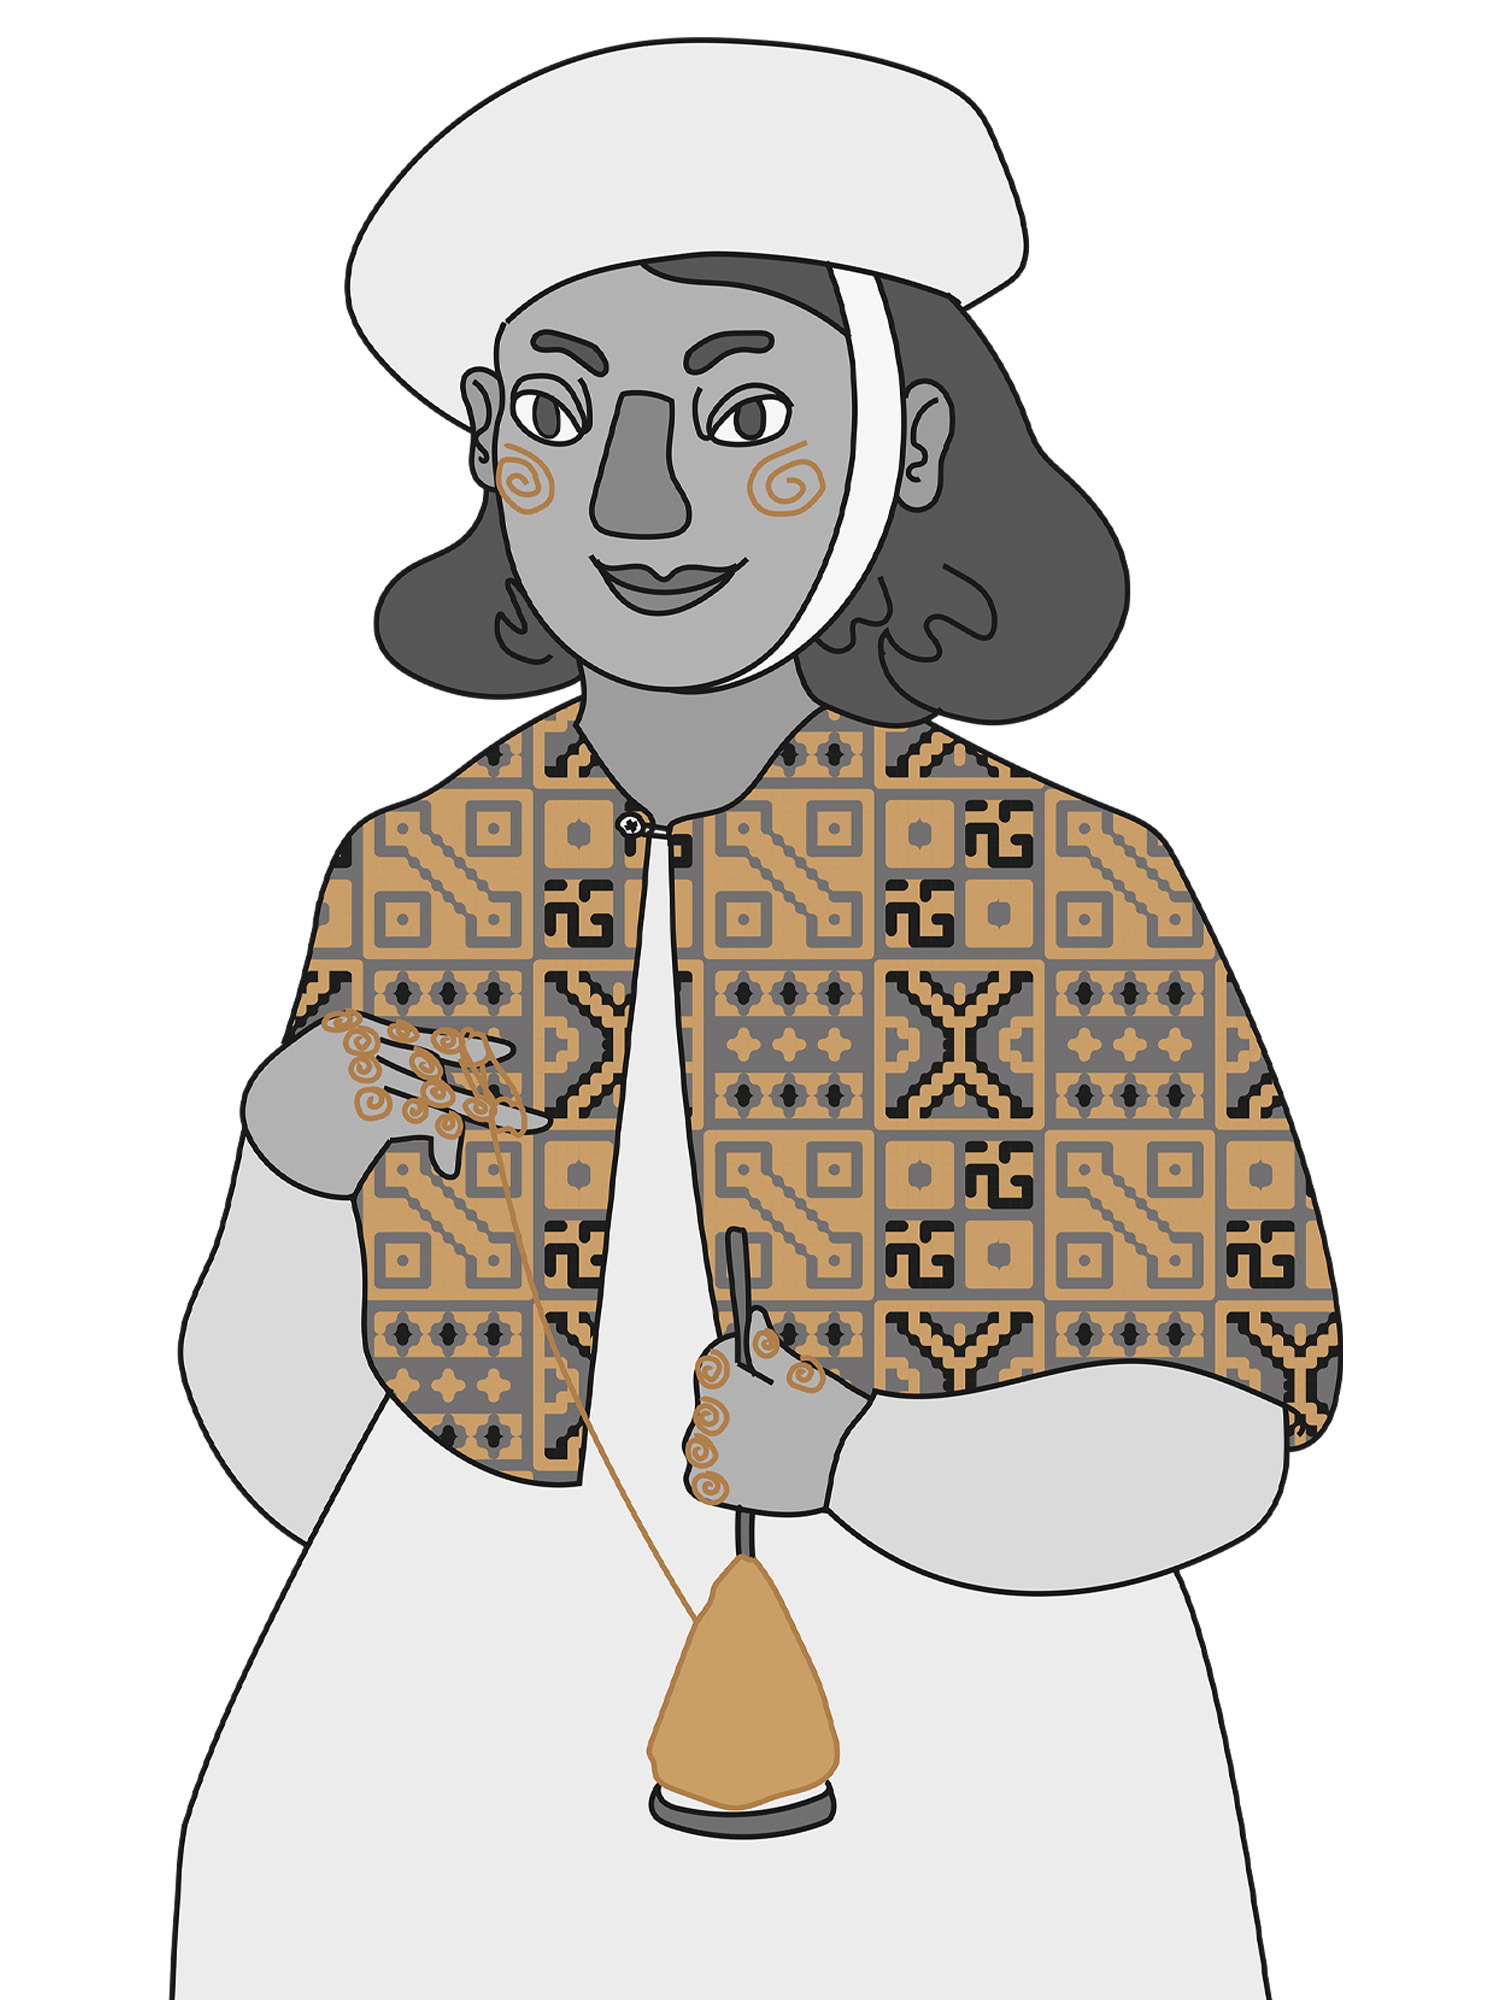 Illustrated Peruvian woman wearing patterned clothes and a hat